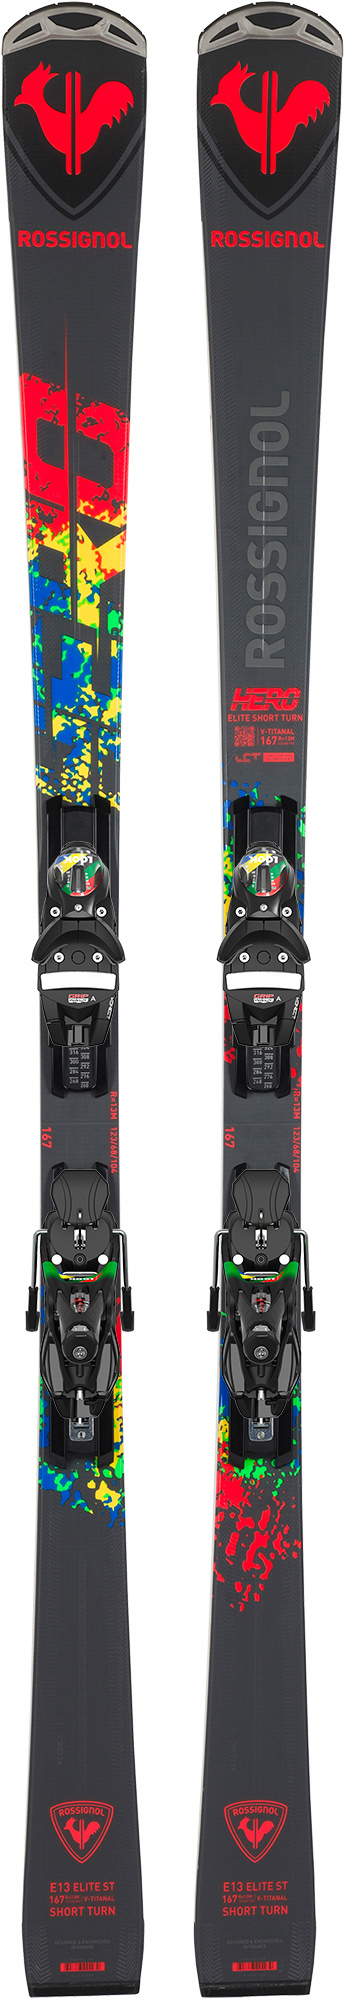 Rossignol Elite ST TI (Limited – Winter Goingsport Edition)